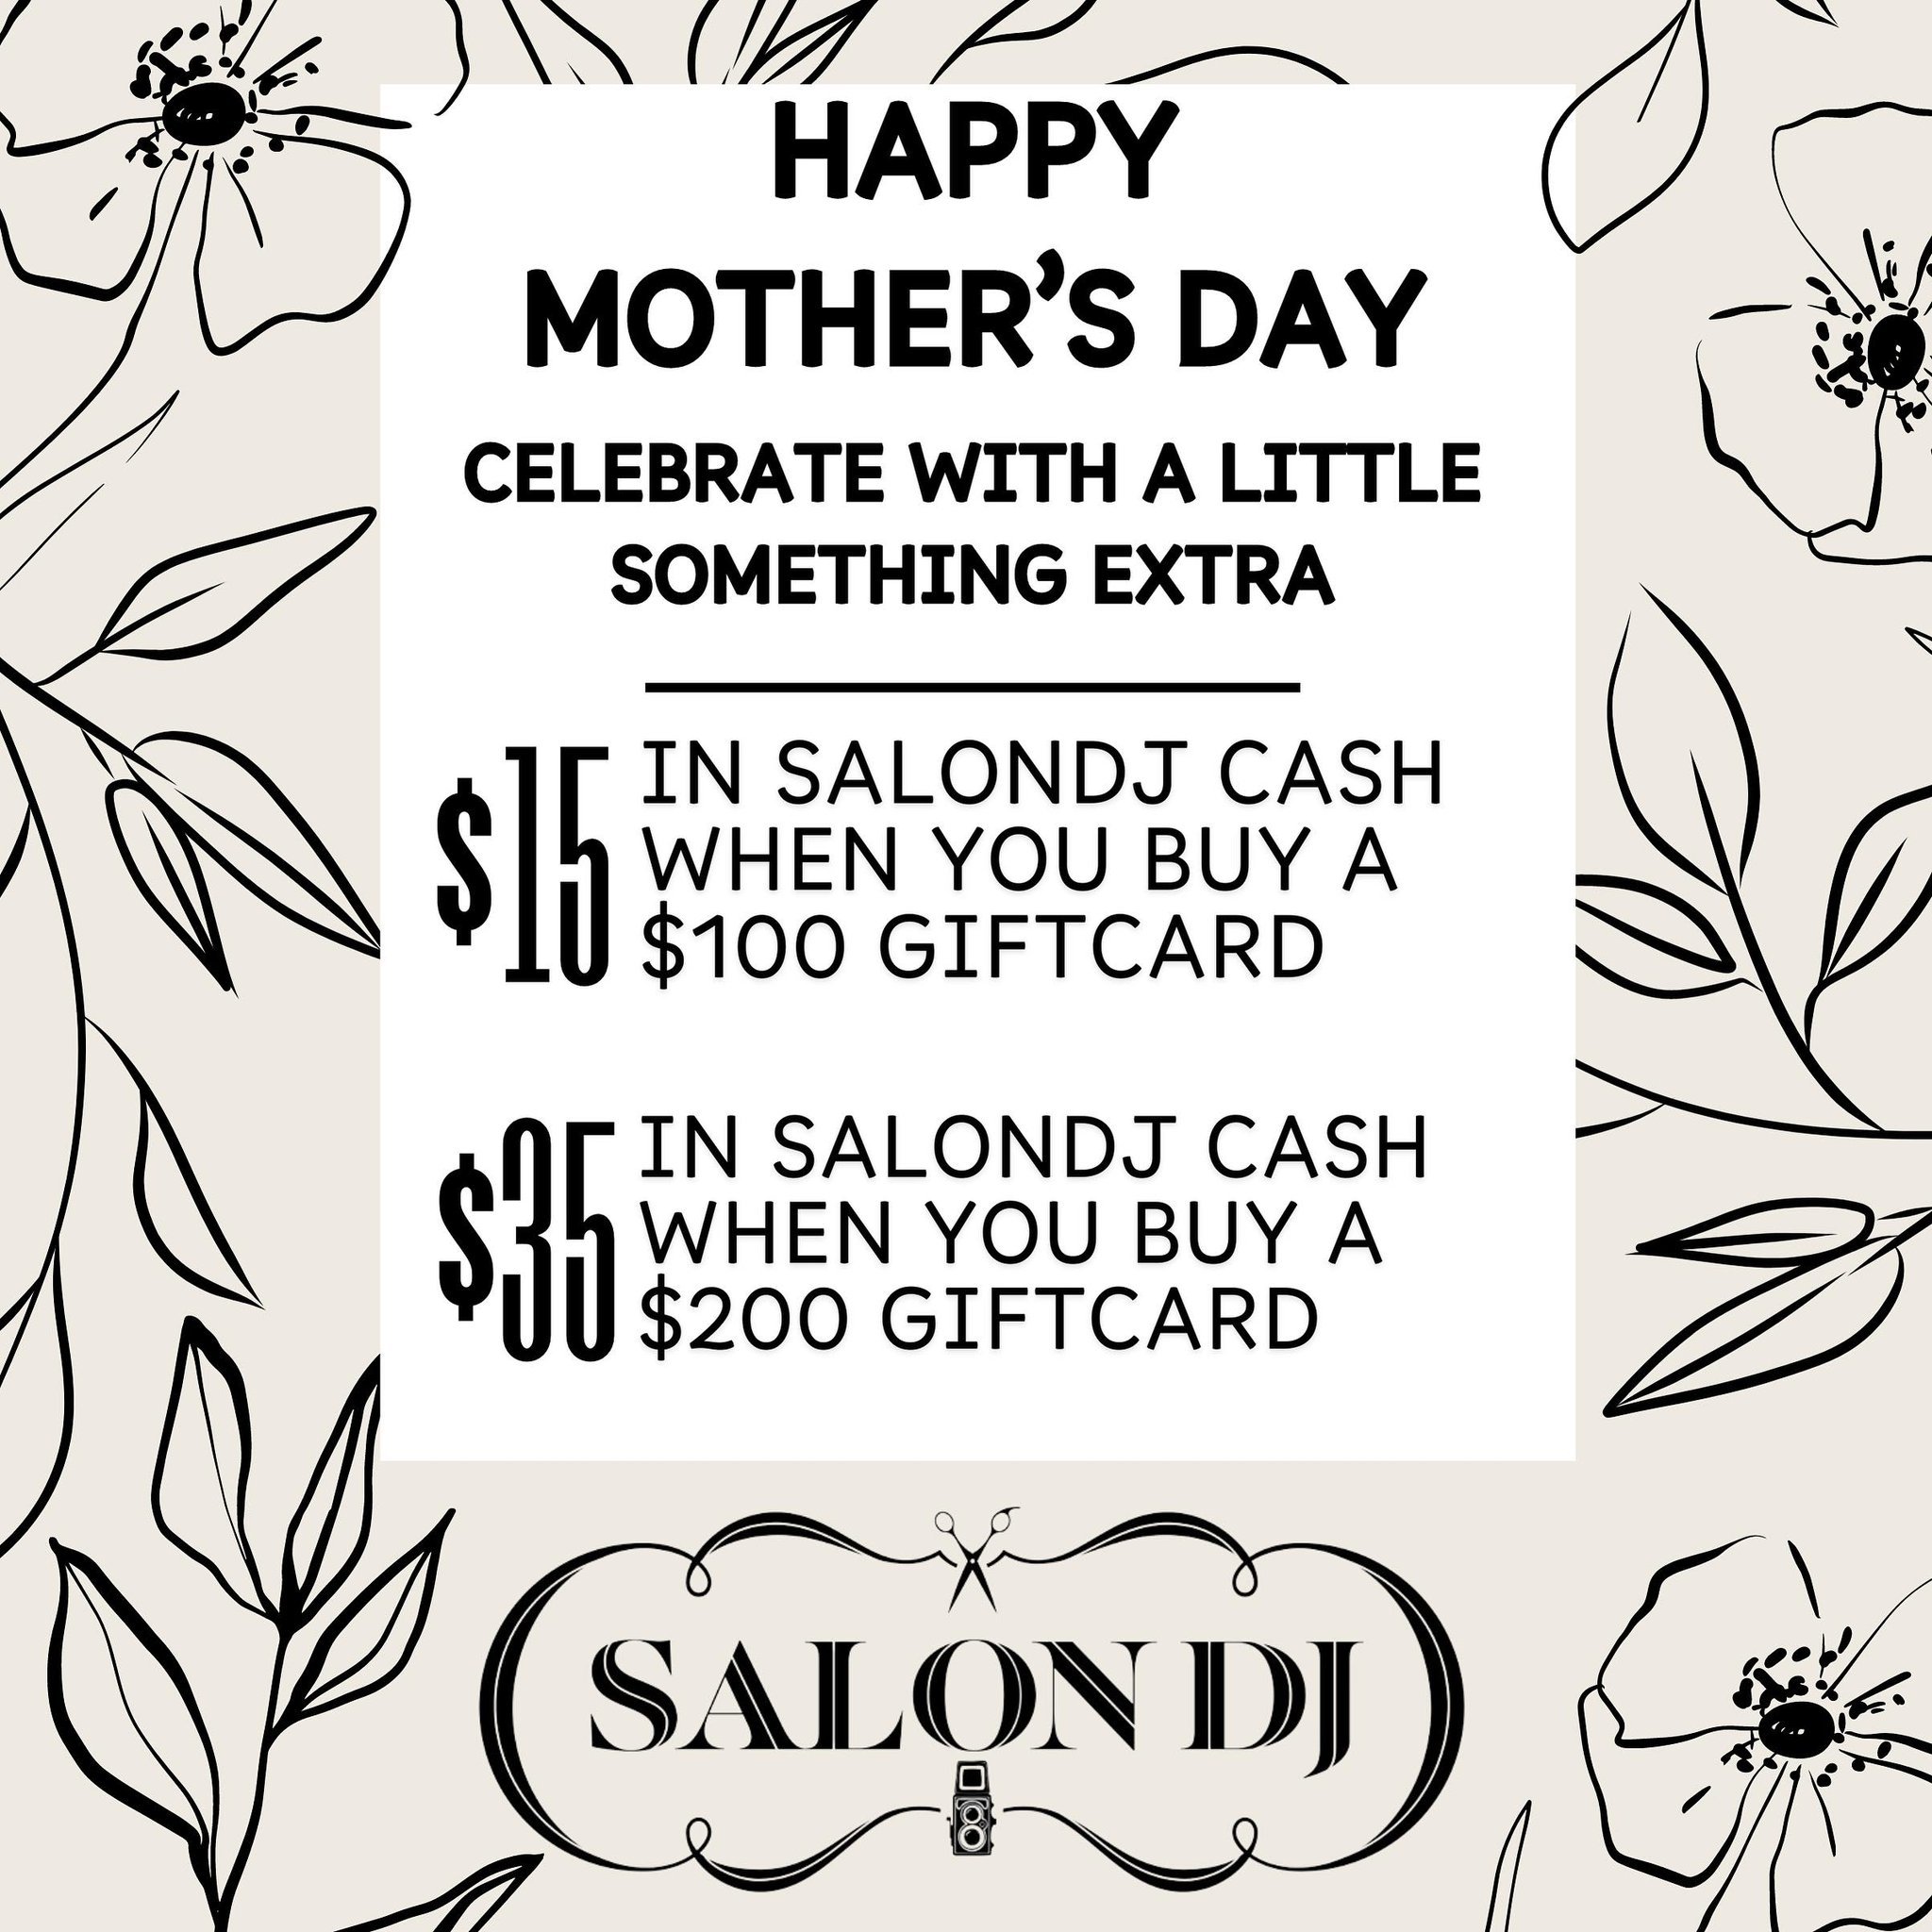 Celebrate Mother&rsquo;s Day in style with SalonDJ Cash! 

call us at 312-964-5088 or email info @ salondjchicago.com for more details!